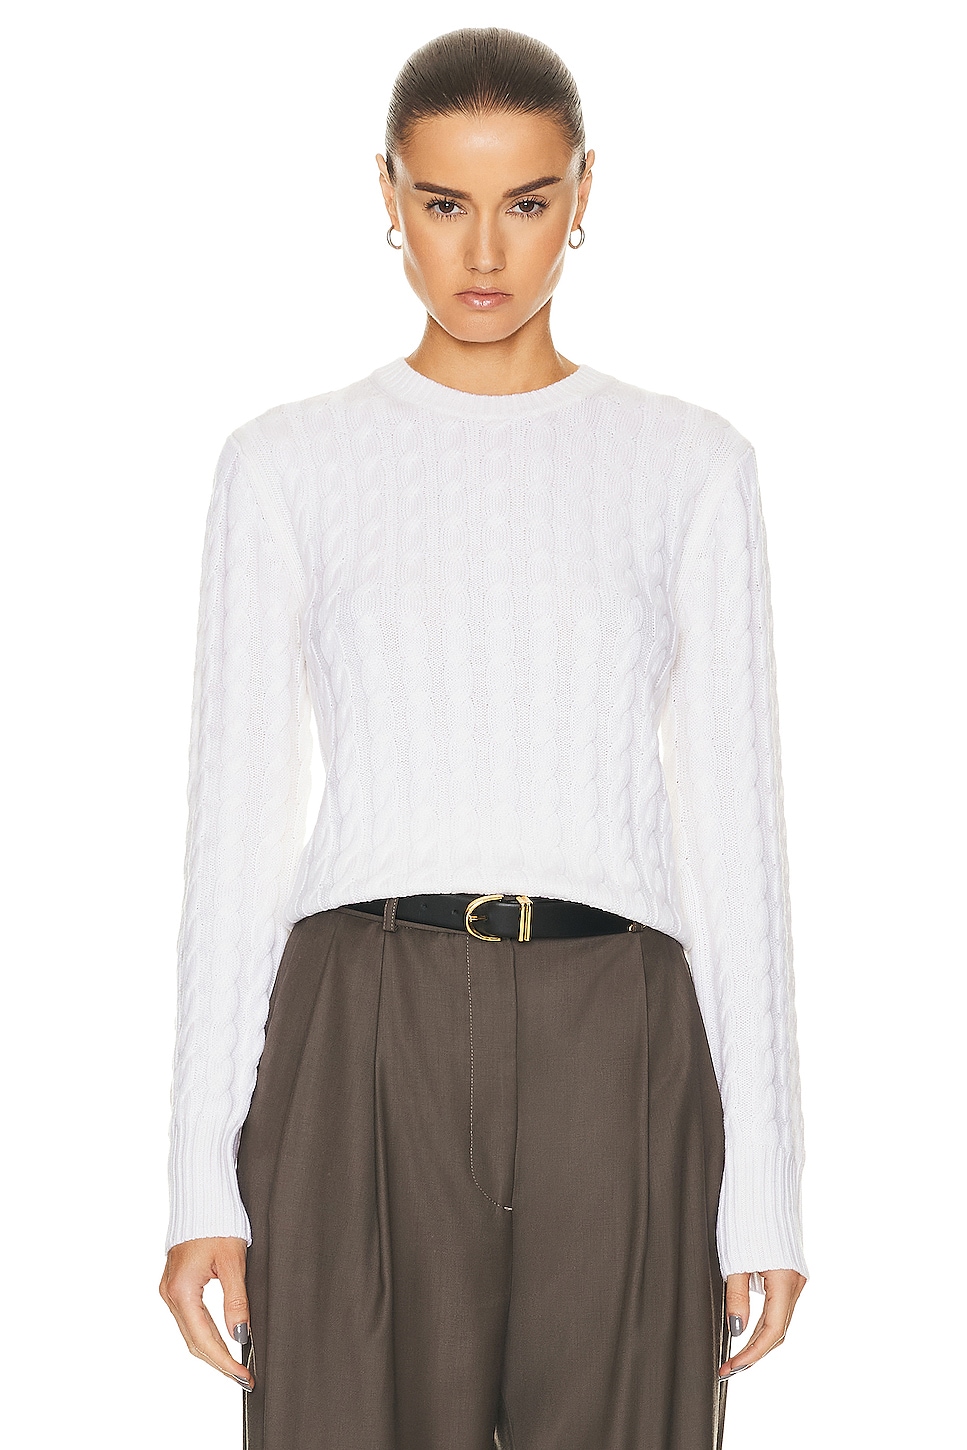 Image 1 of Toteme Petite Cable Knit Sweater in Cream